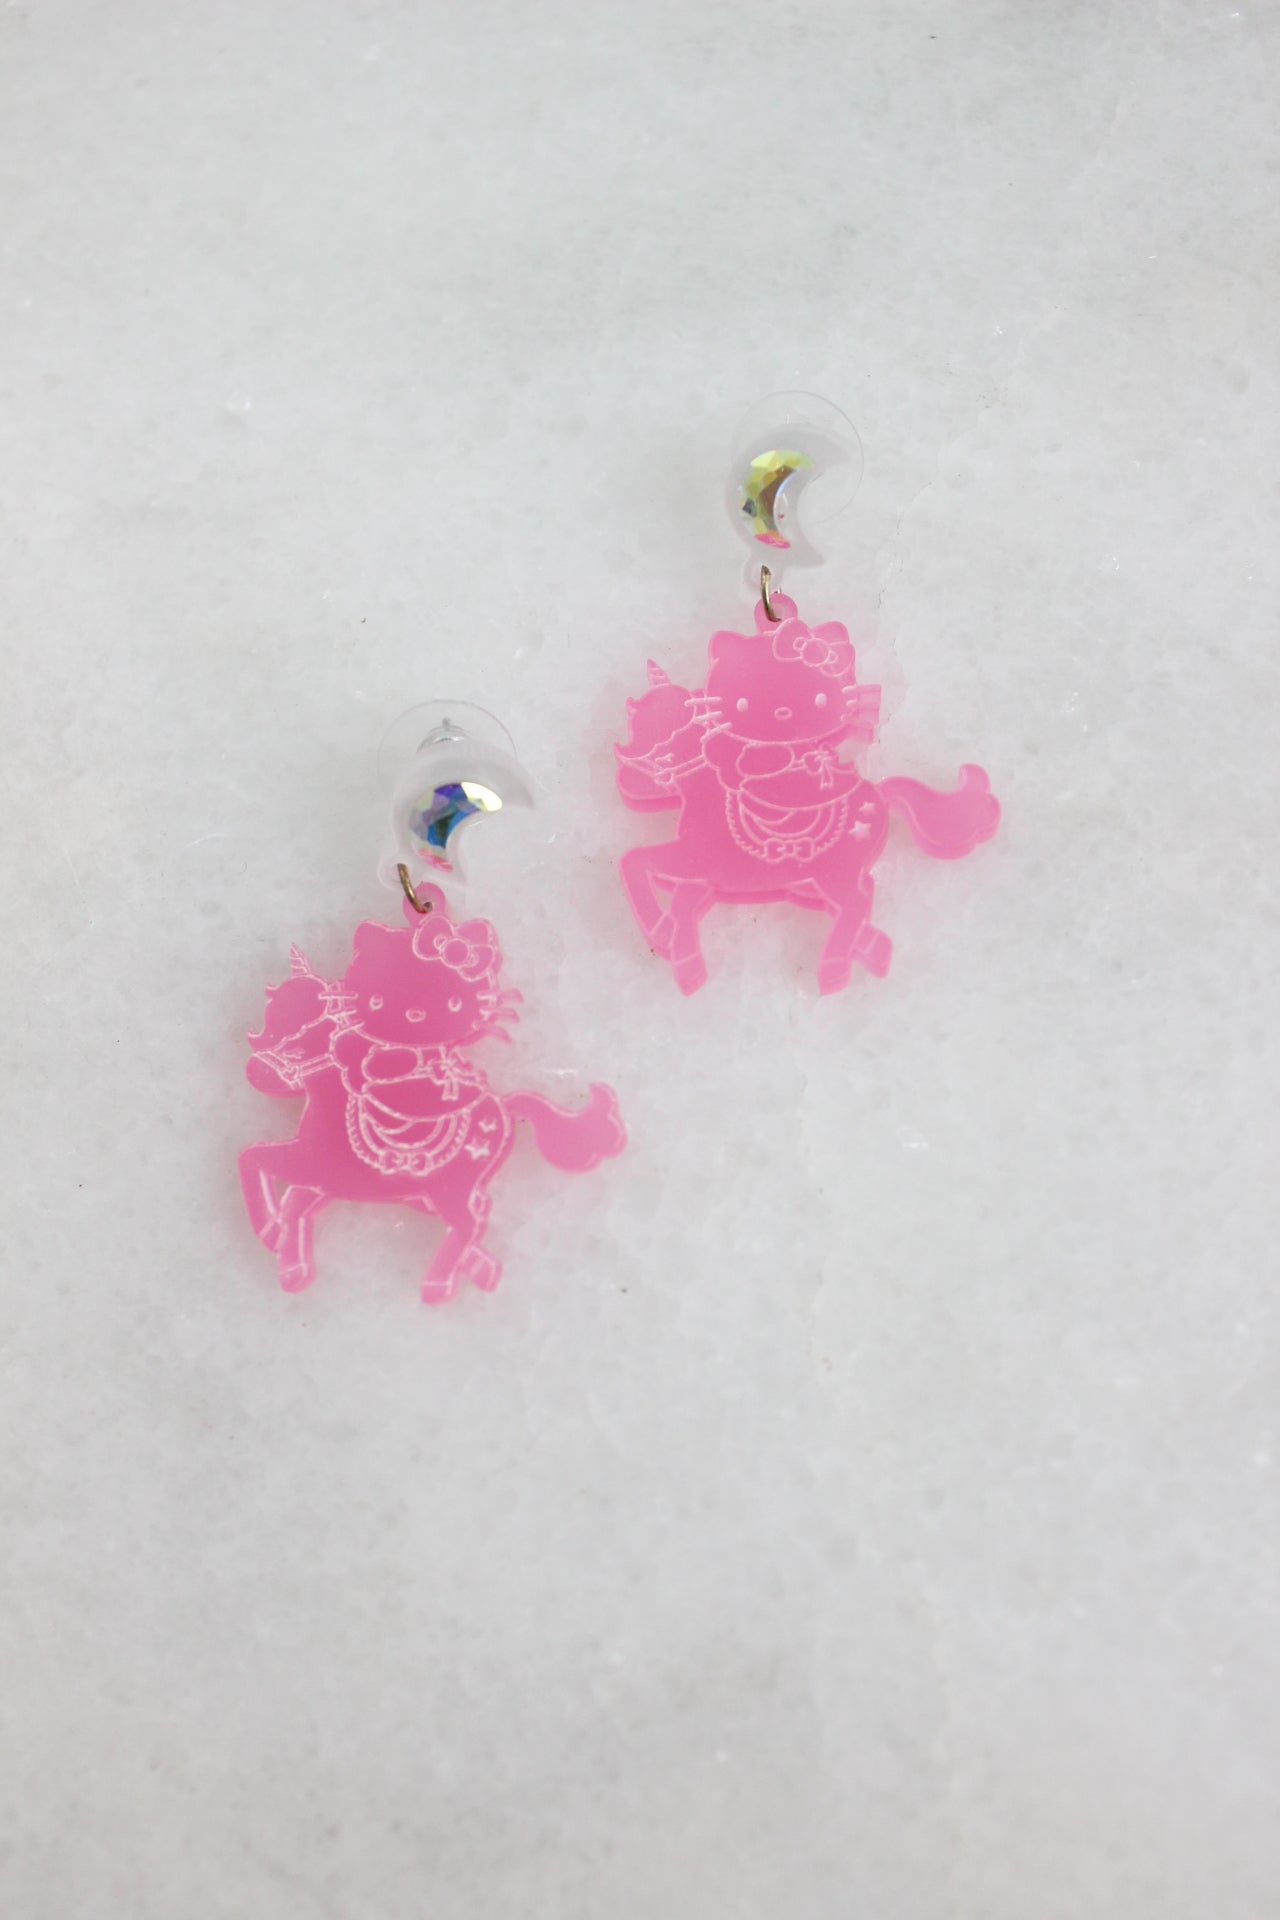 top view of pink earrings laid flat showcasing the carved character detail.